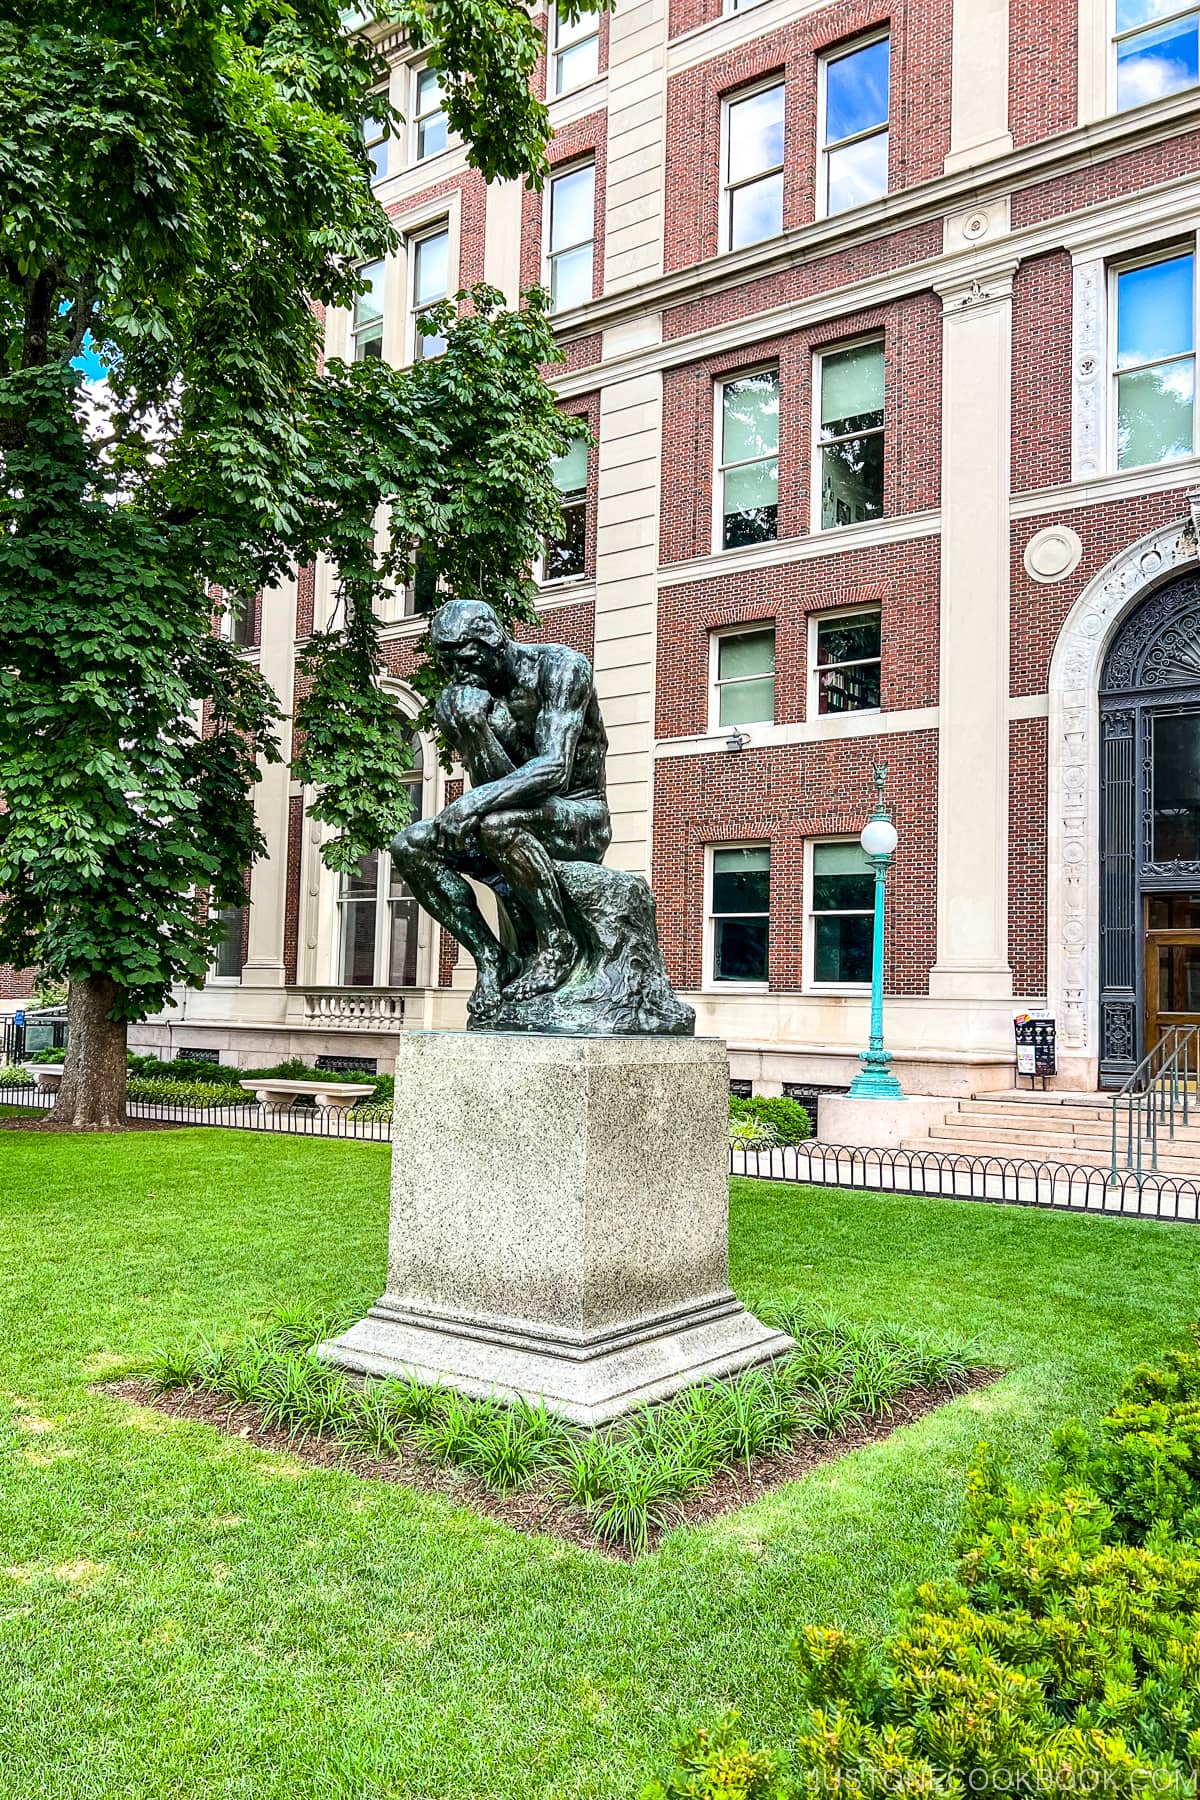 The Thinker Statue at Columbia University